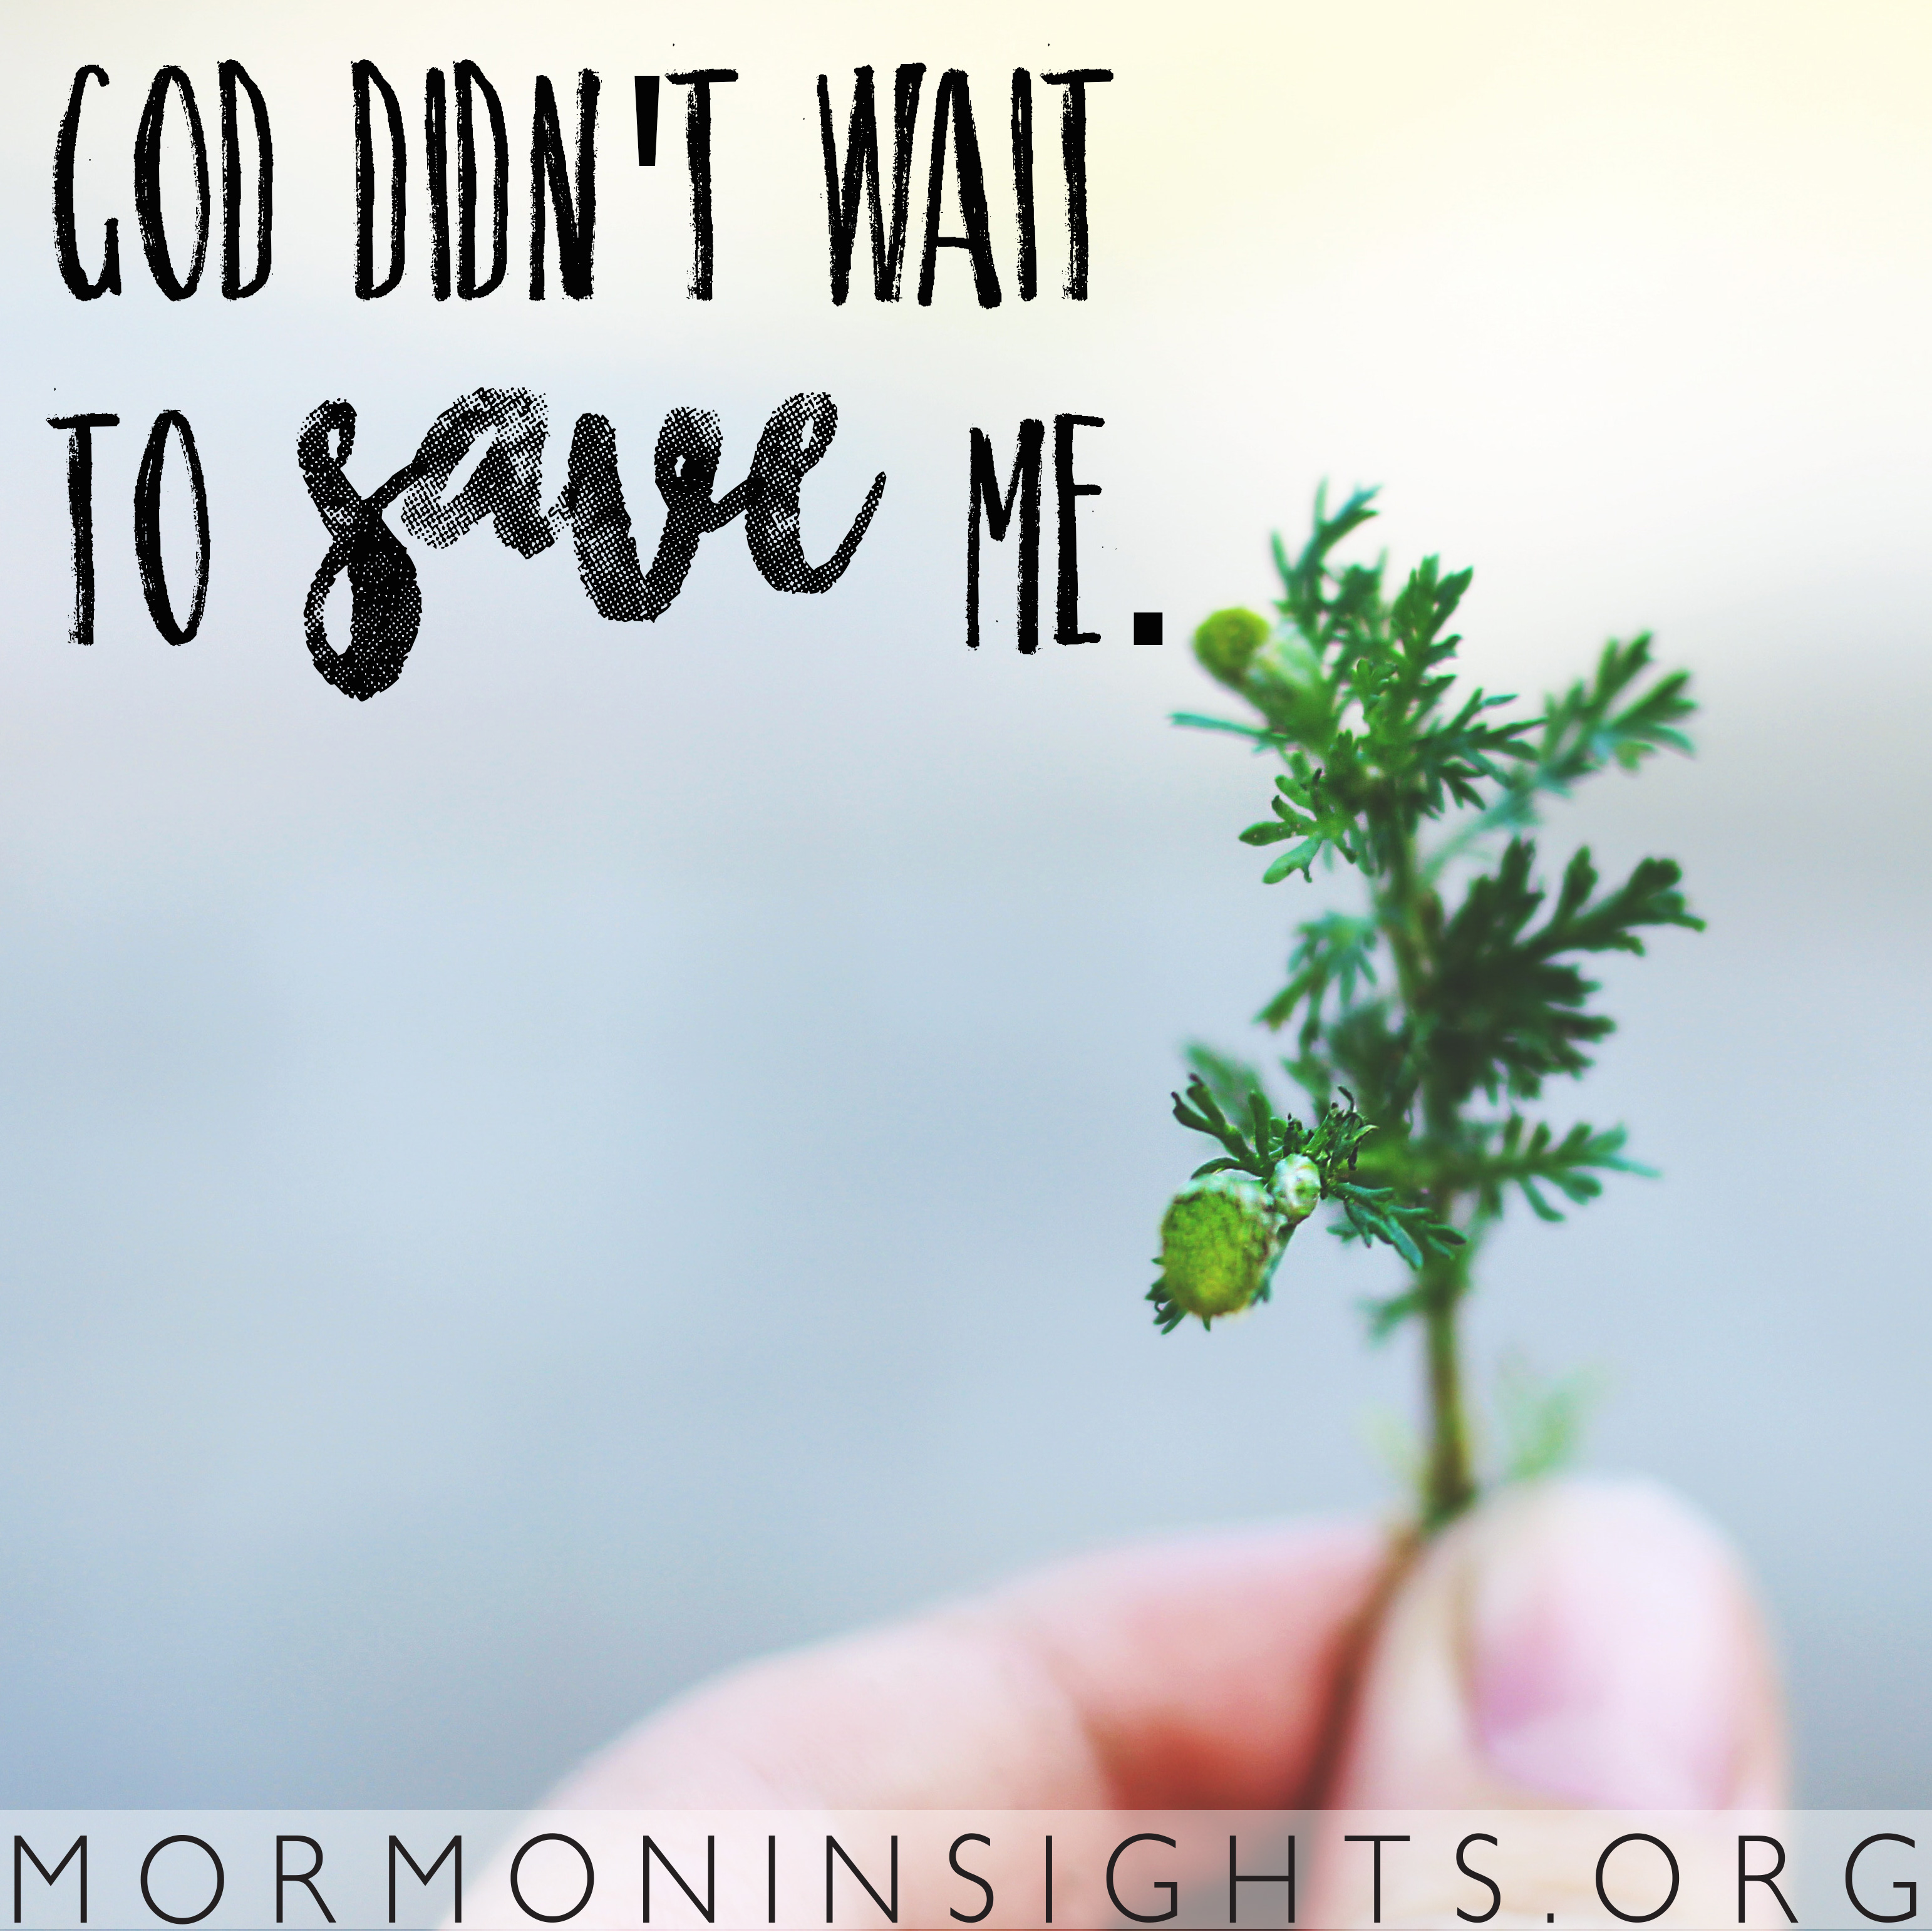 God didn't want to save me